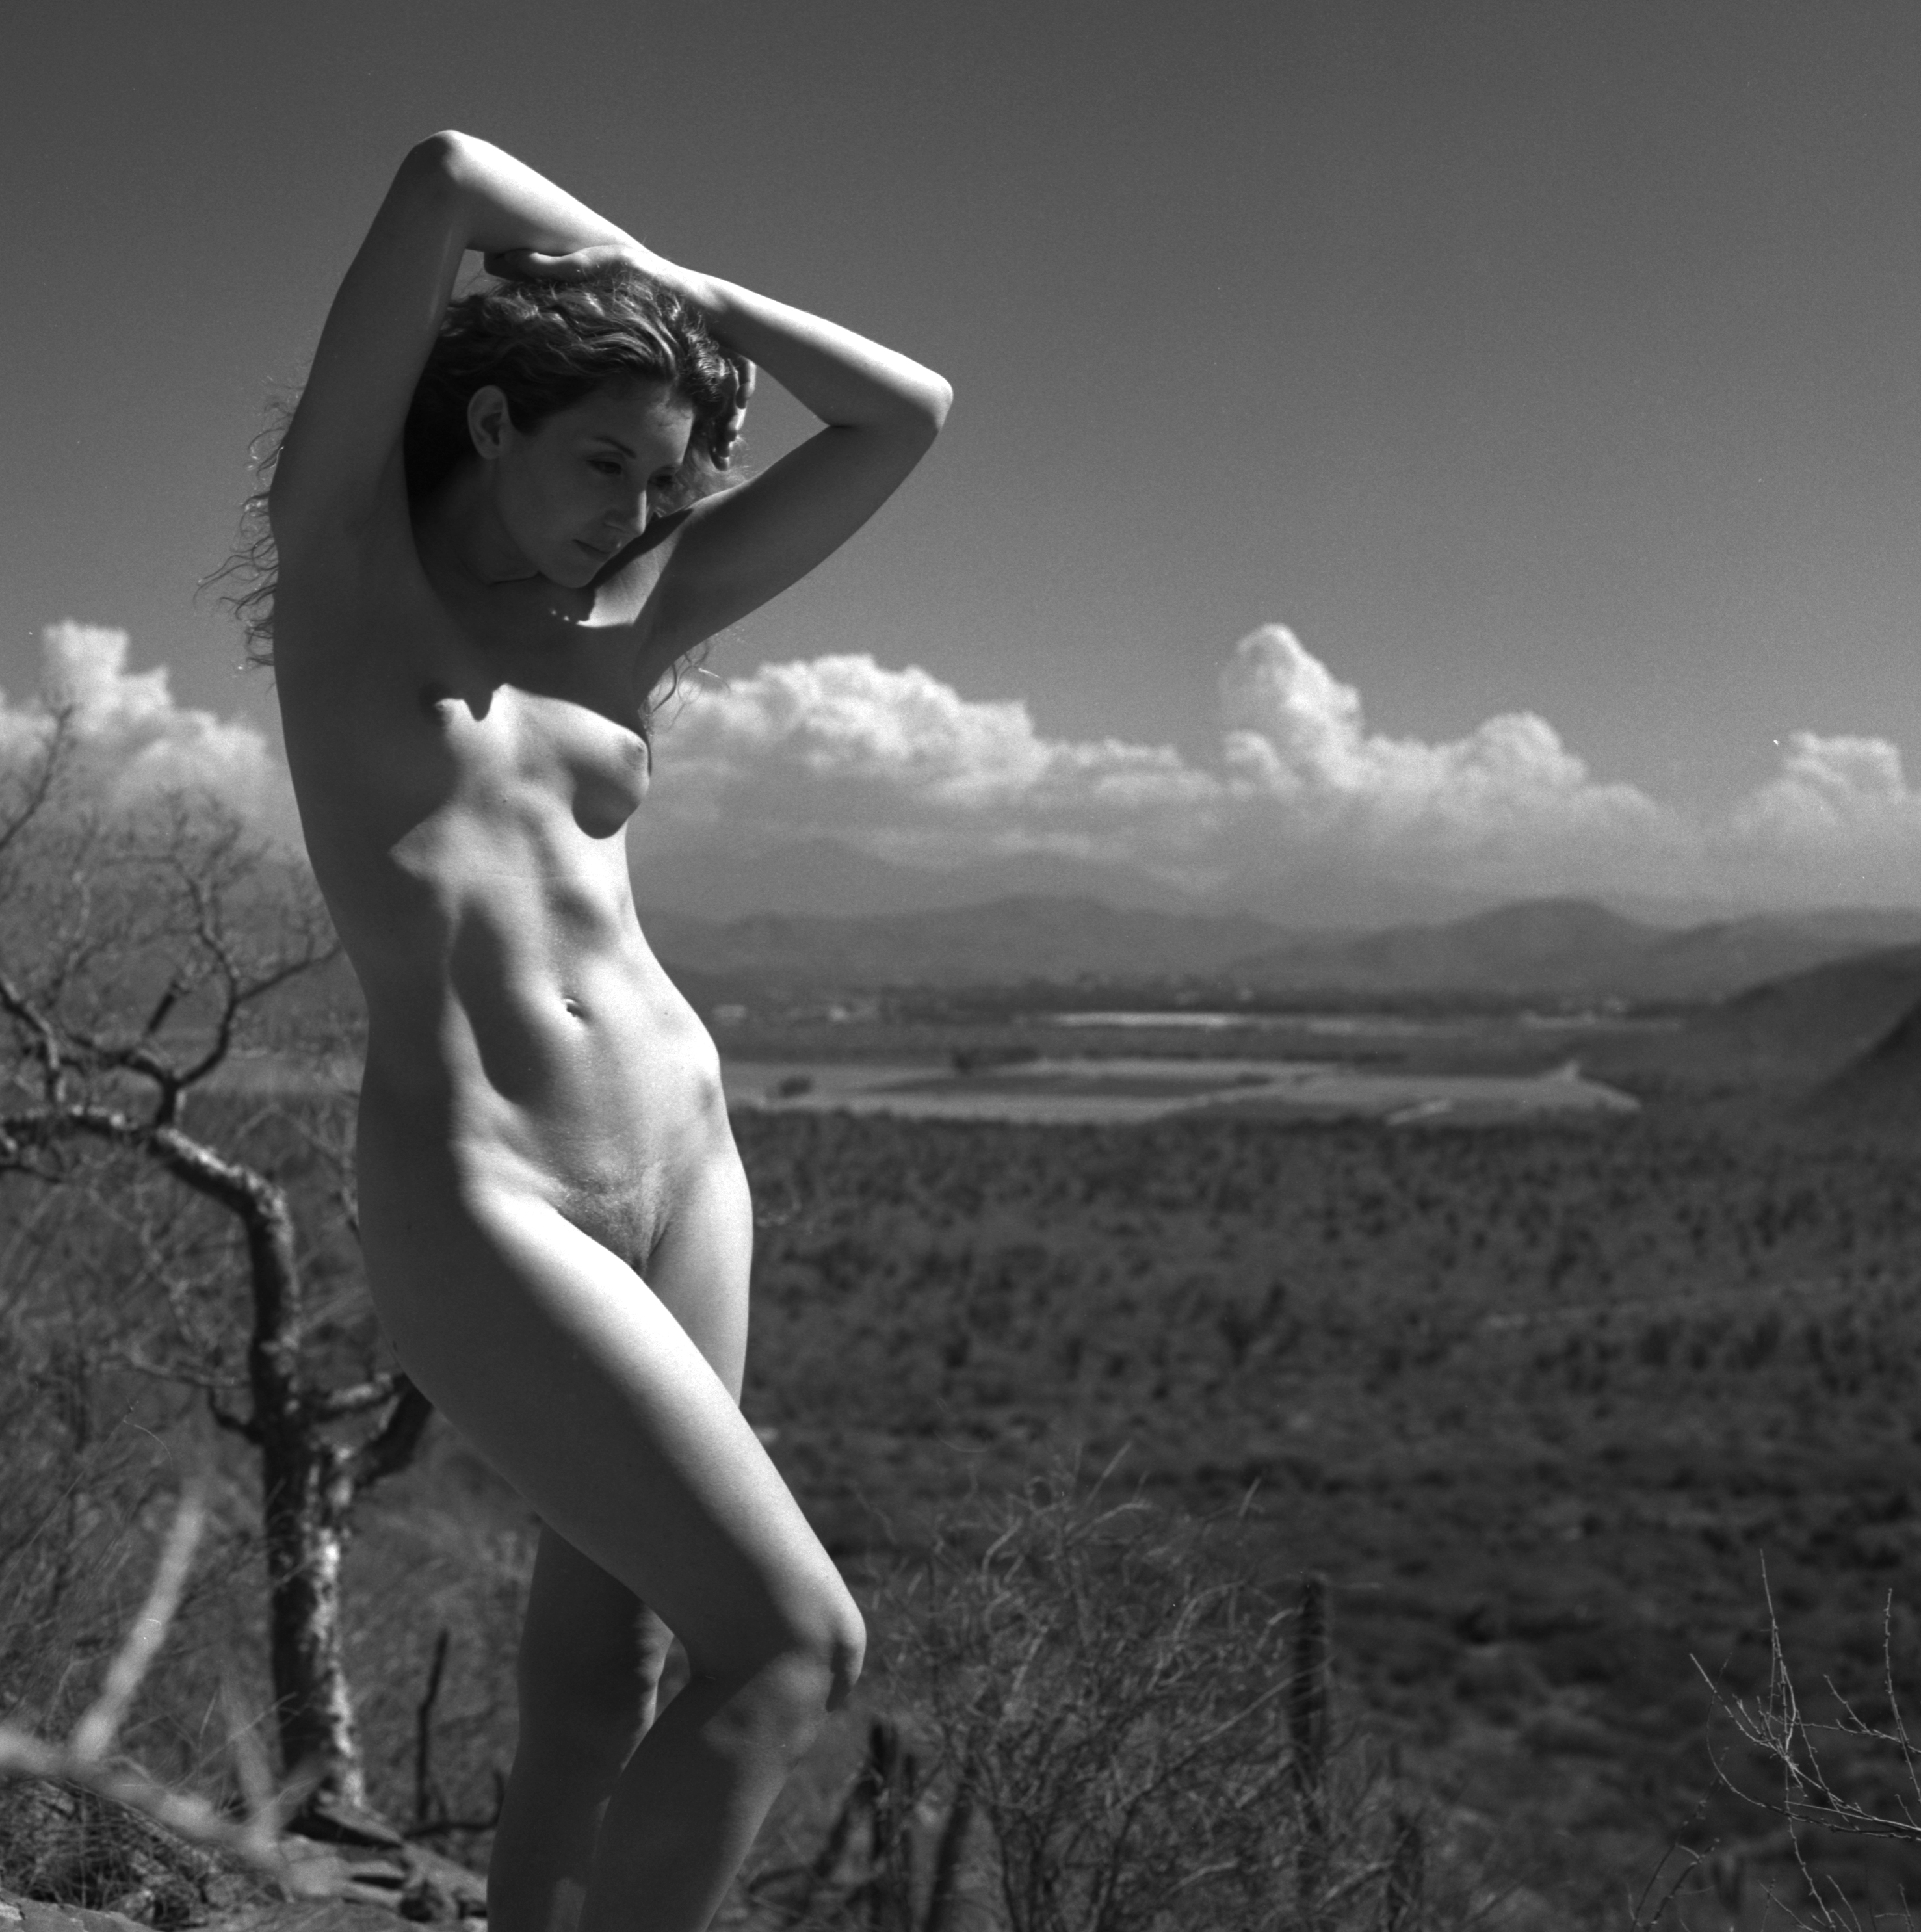 The art of lucien clergue superb nude photography